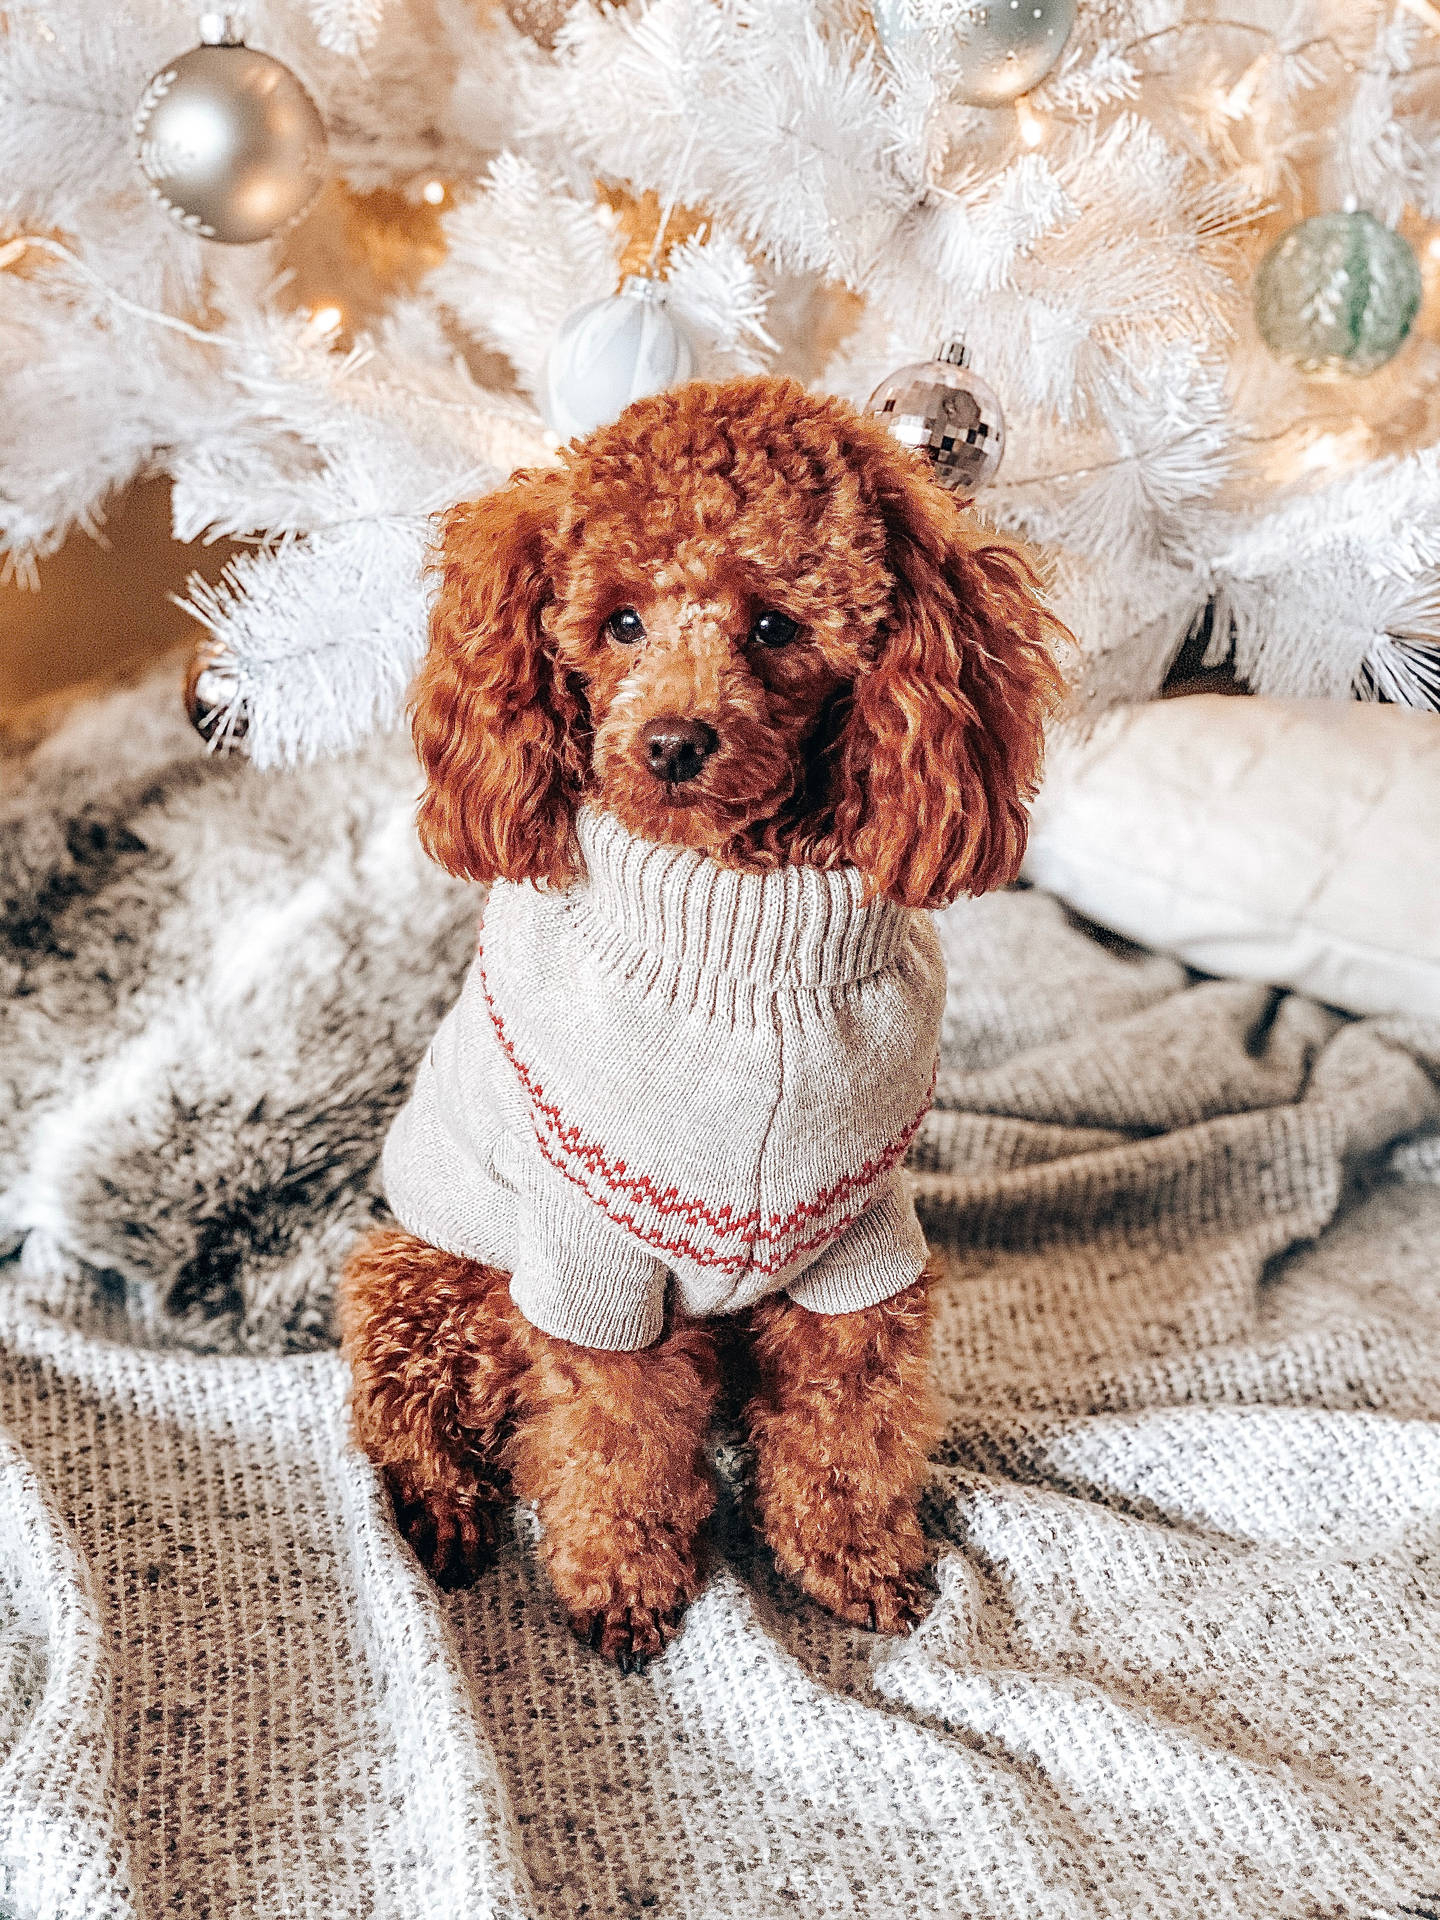 1440x1920 Download Toy Poodle Knit Sweater Wallpaper